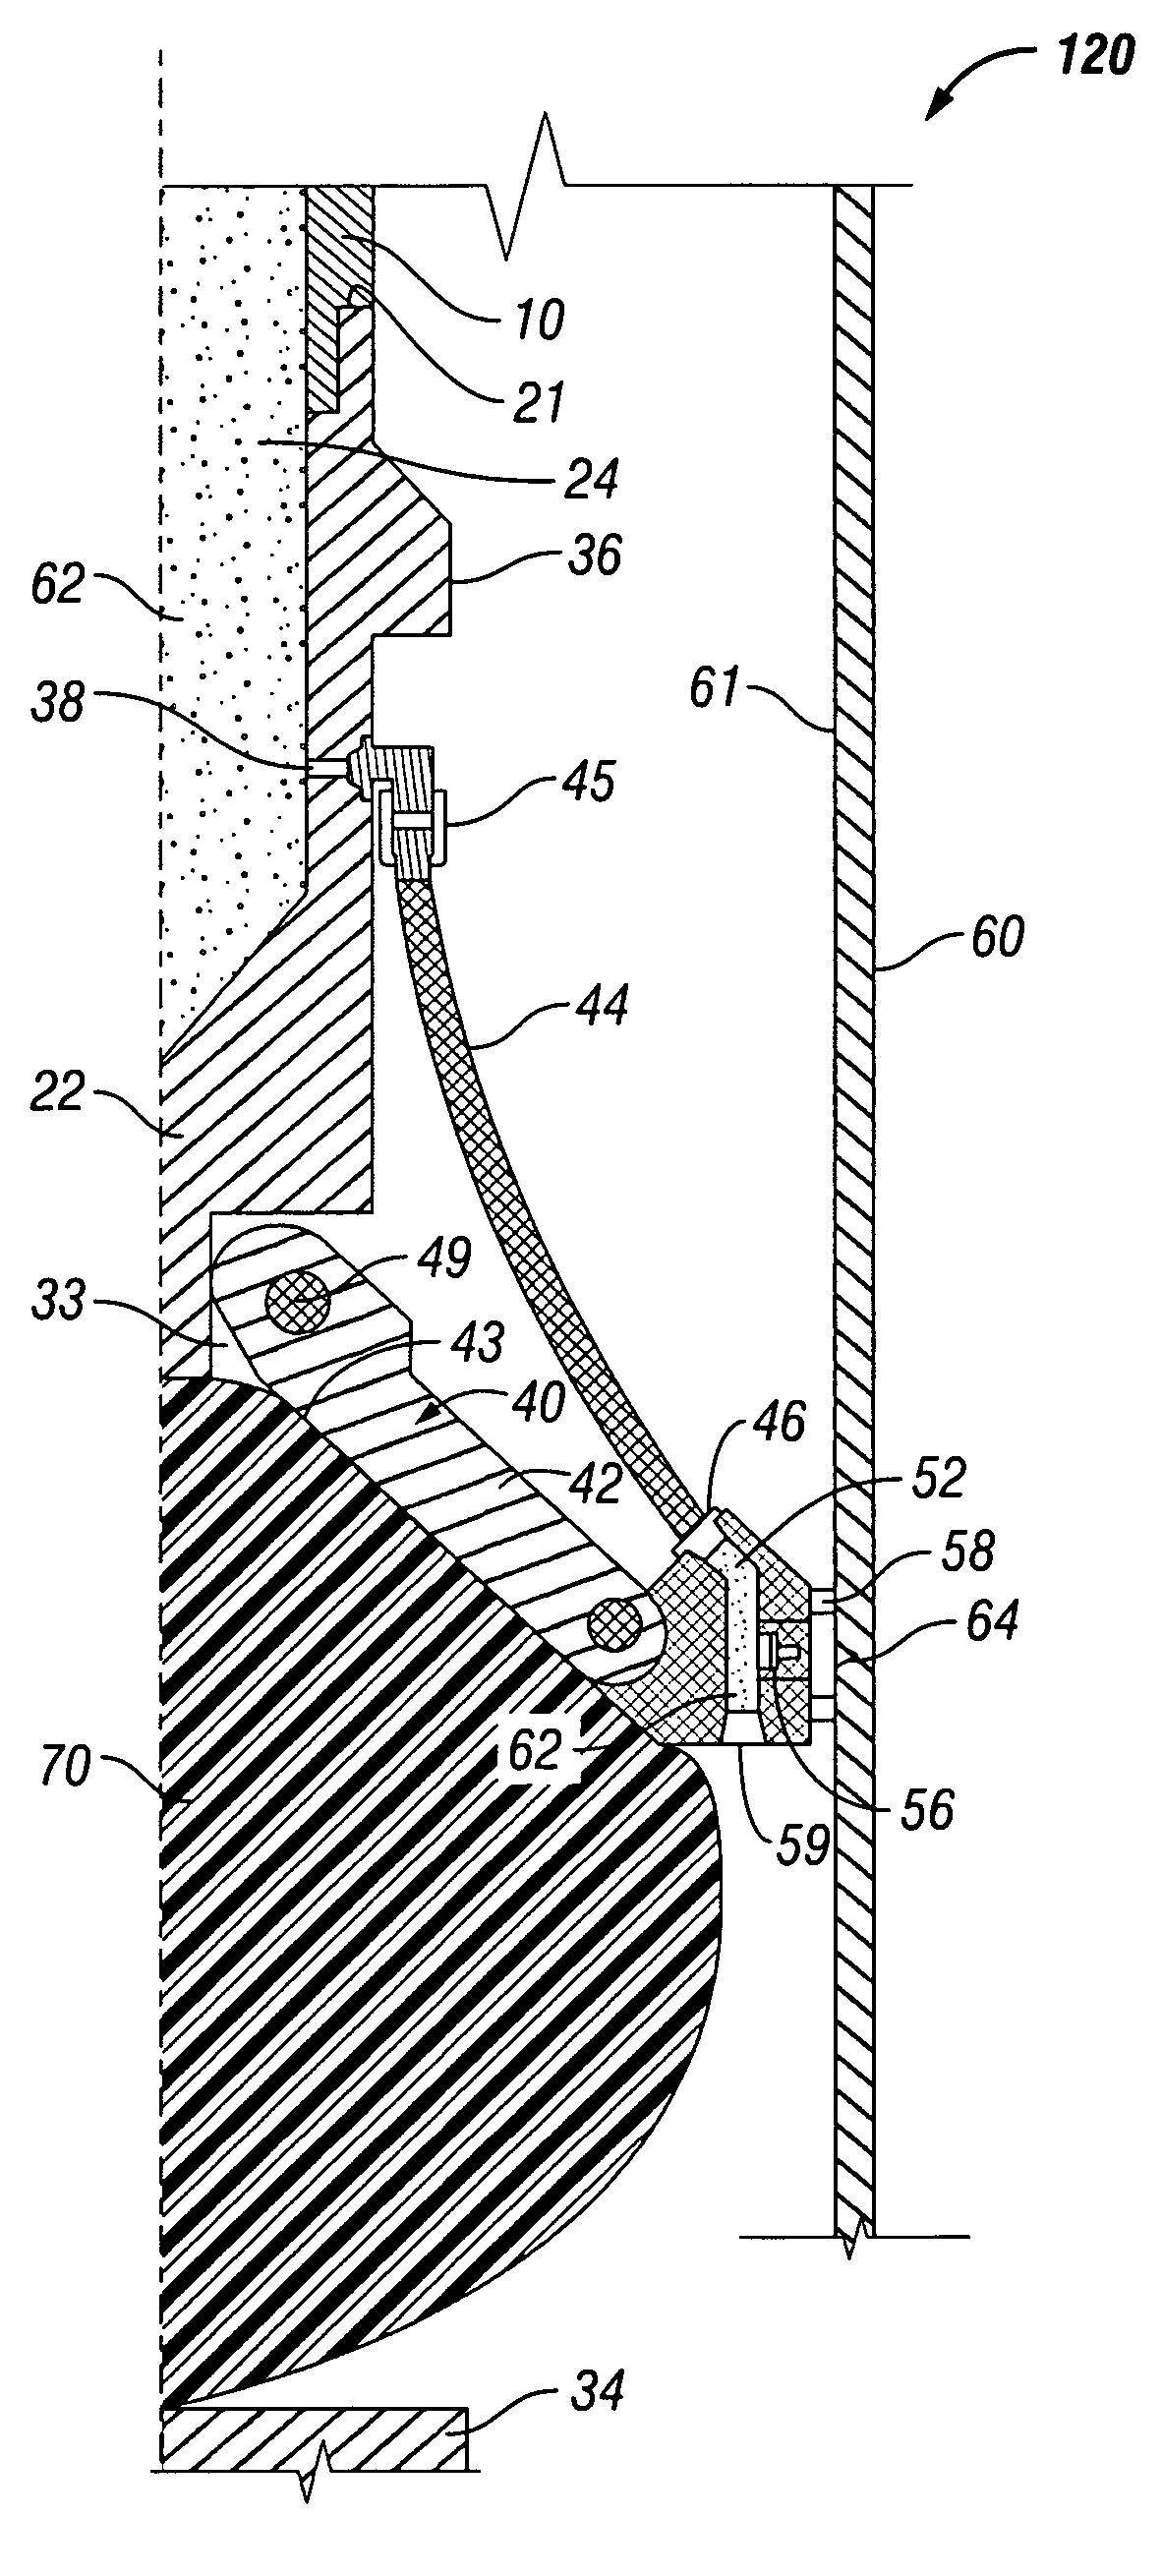 Radially expandable downhole fluid jet cutting tool having an inflatable member